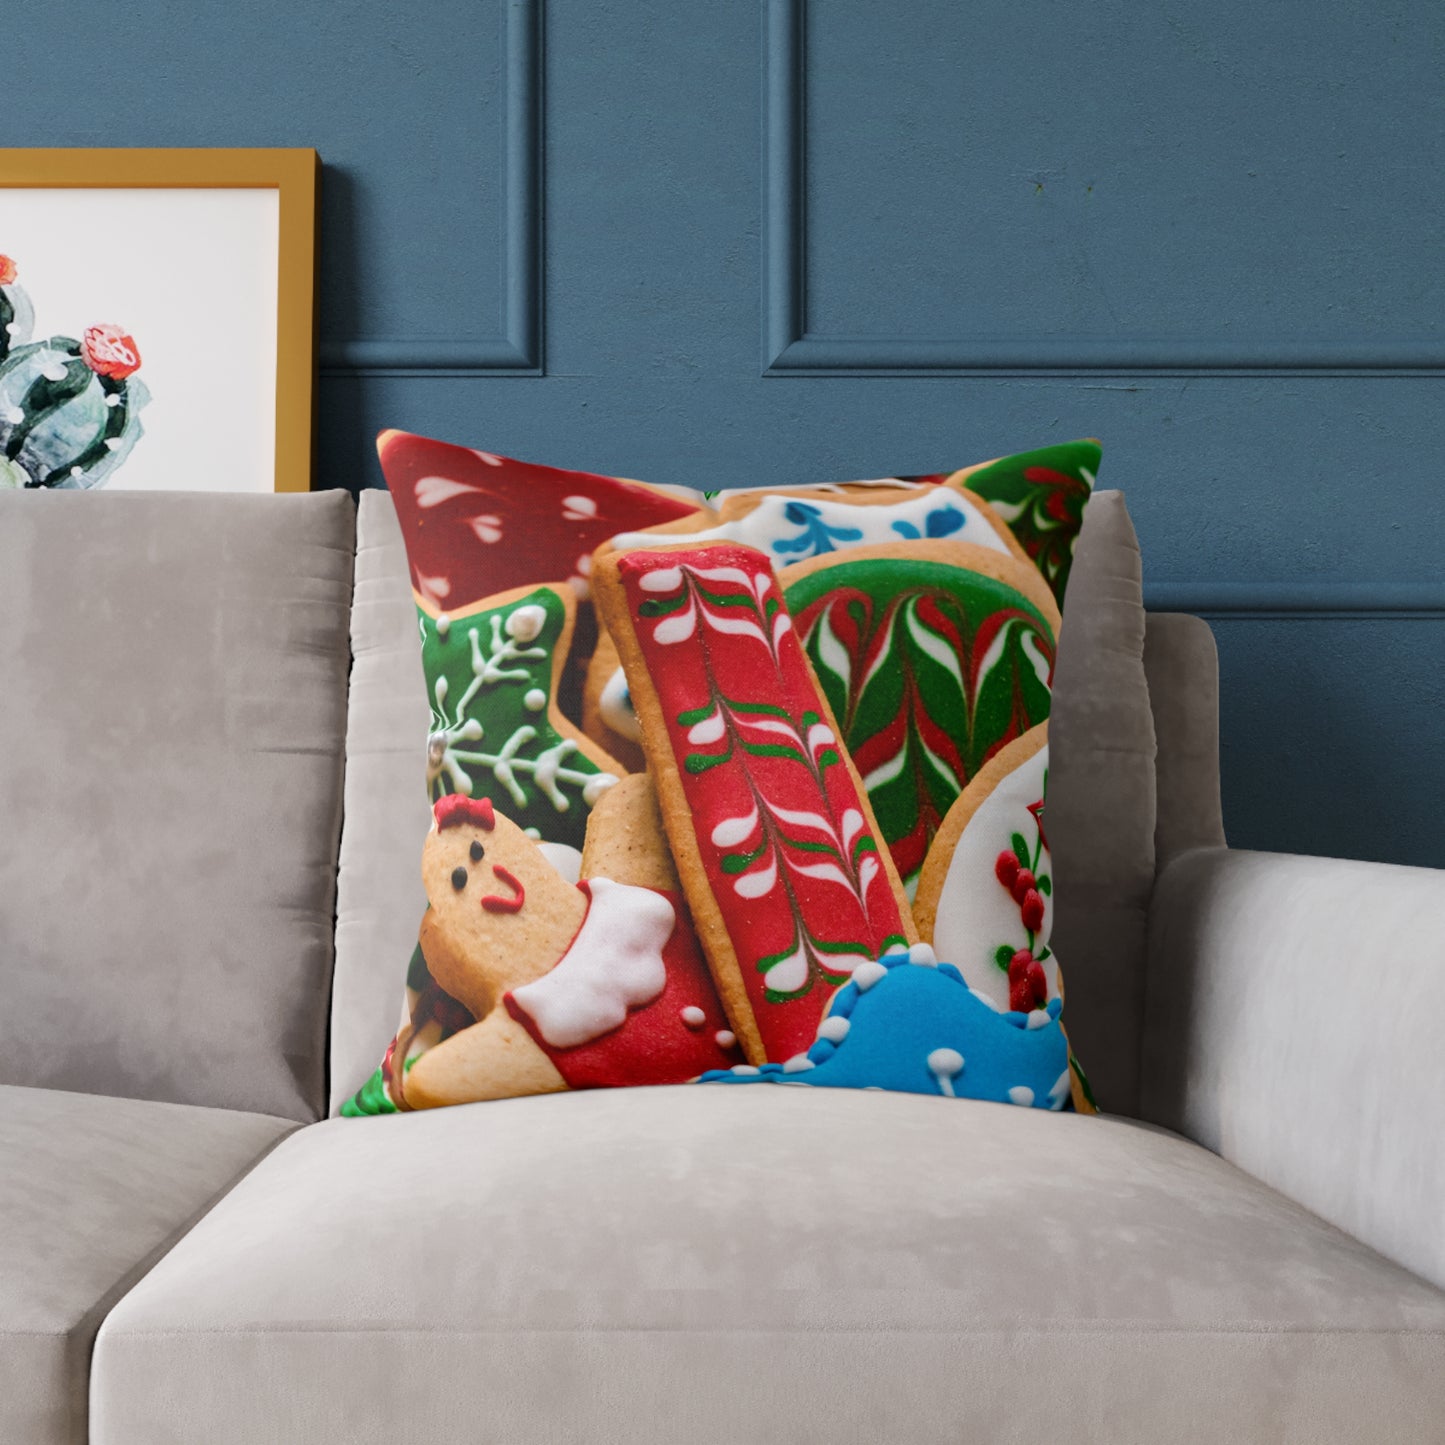 Spun Polyester Pillow - Merry Christmas - Objects